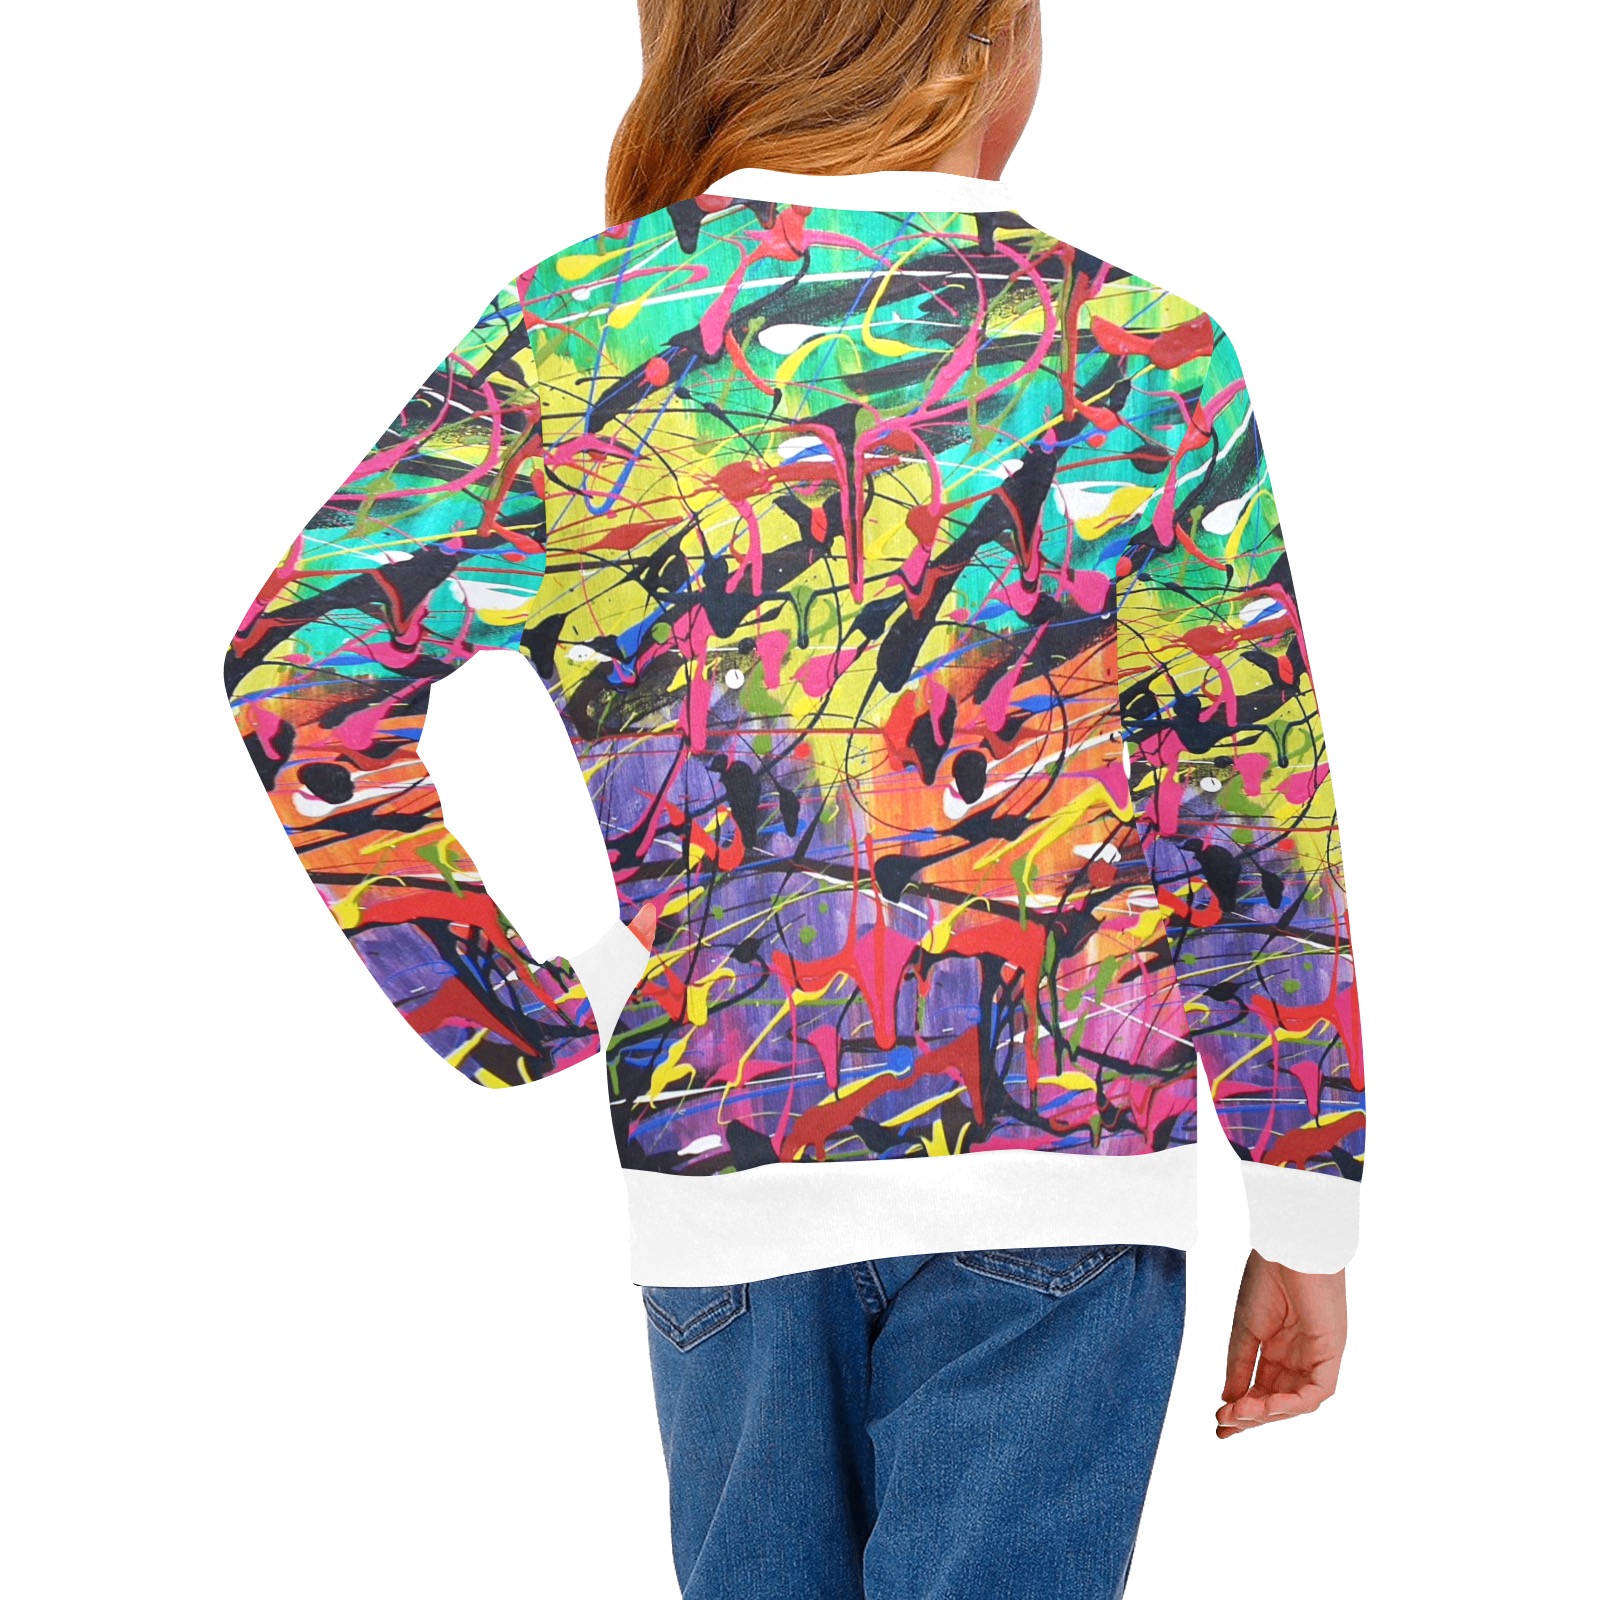 Chaos Girls' All Over Print Crew Neck Sweater (Model H49)